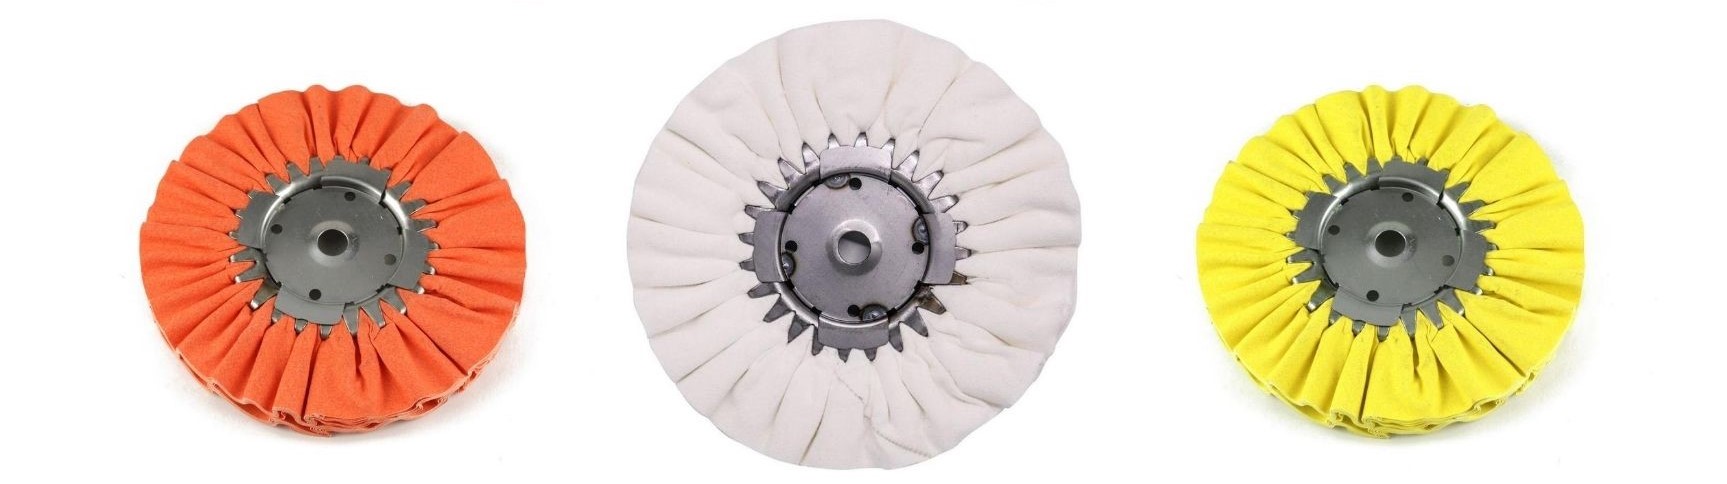 Different color airway buffing wheels - orange, white, yellow